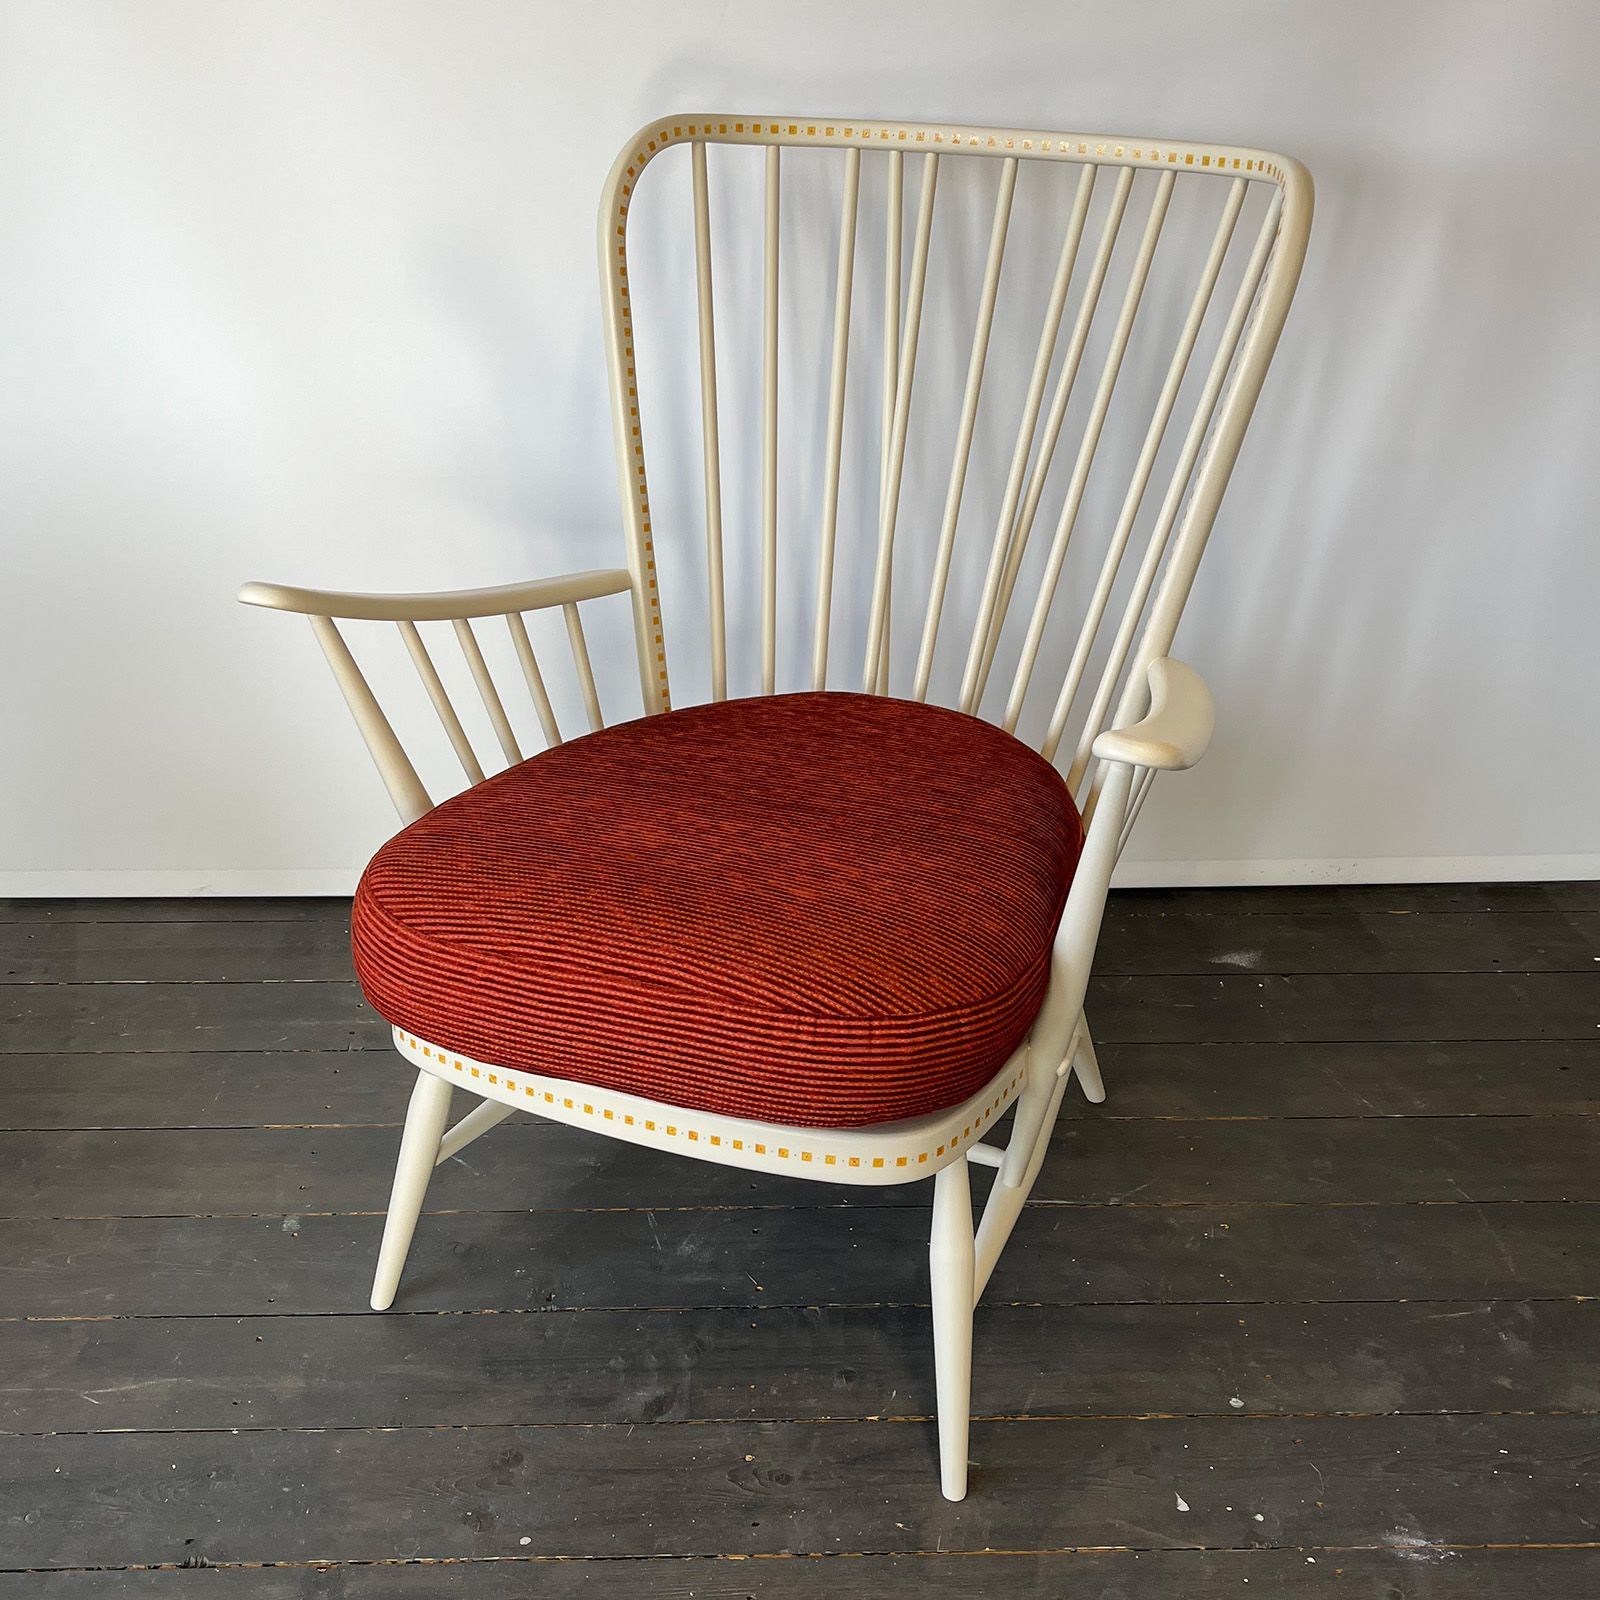 Ercol Spindle Chair Upcycled by Helen Bateman